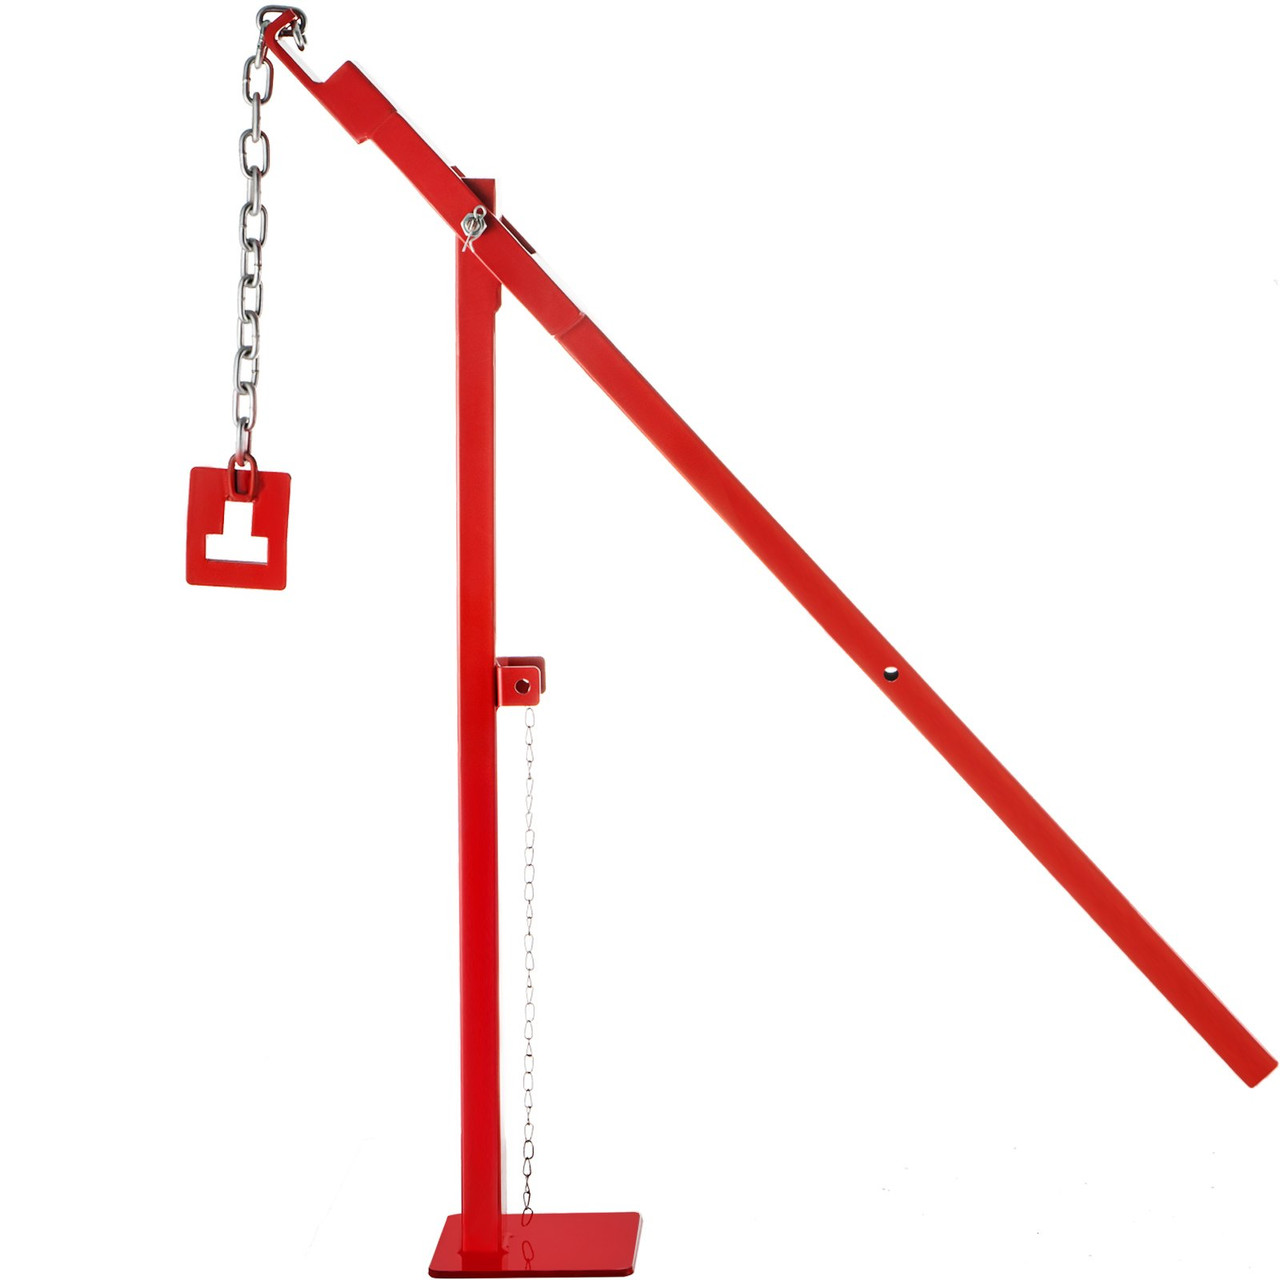 T Post Remover Puller, 15 3/4" Long Chain T Post Puller, 32" Standing Frame Fence Post Puller Set with Lifting Chain Puller, T Stake Puller for Round Fence Posts, Metal, Sign Posts & Tree Stump